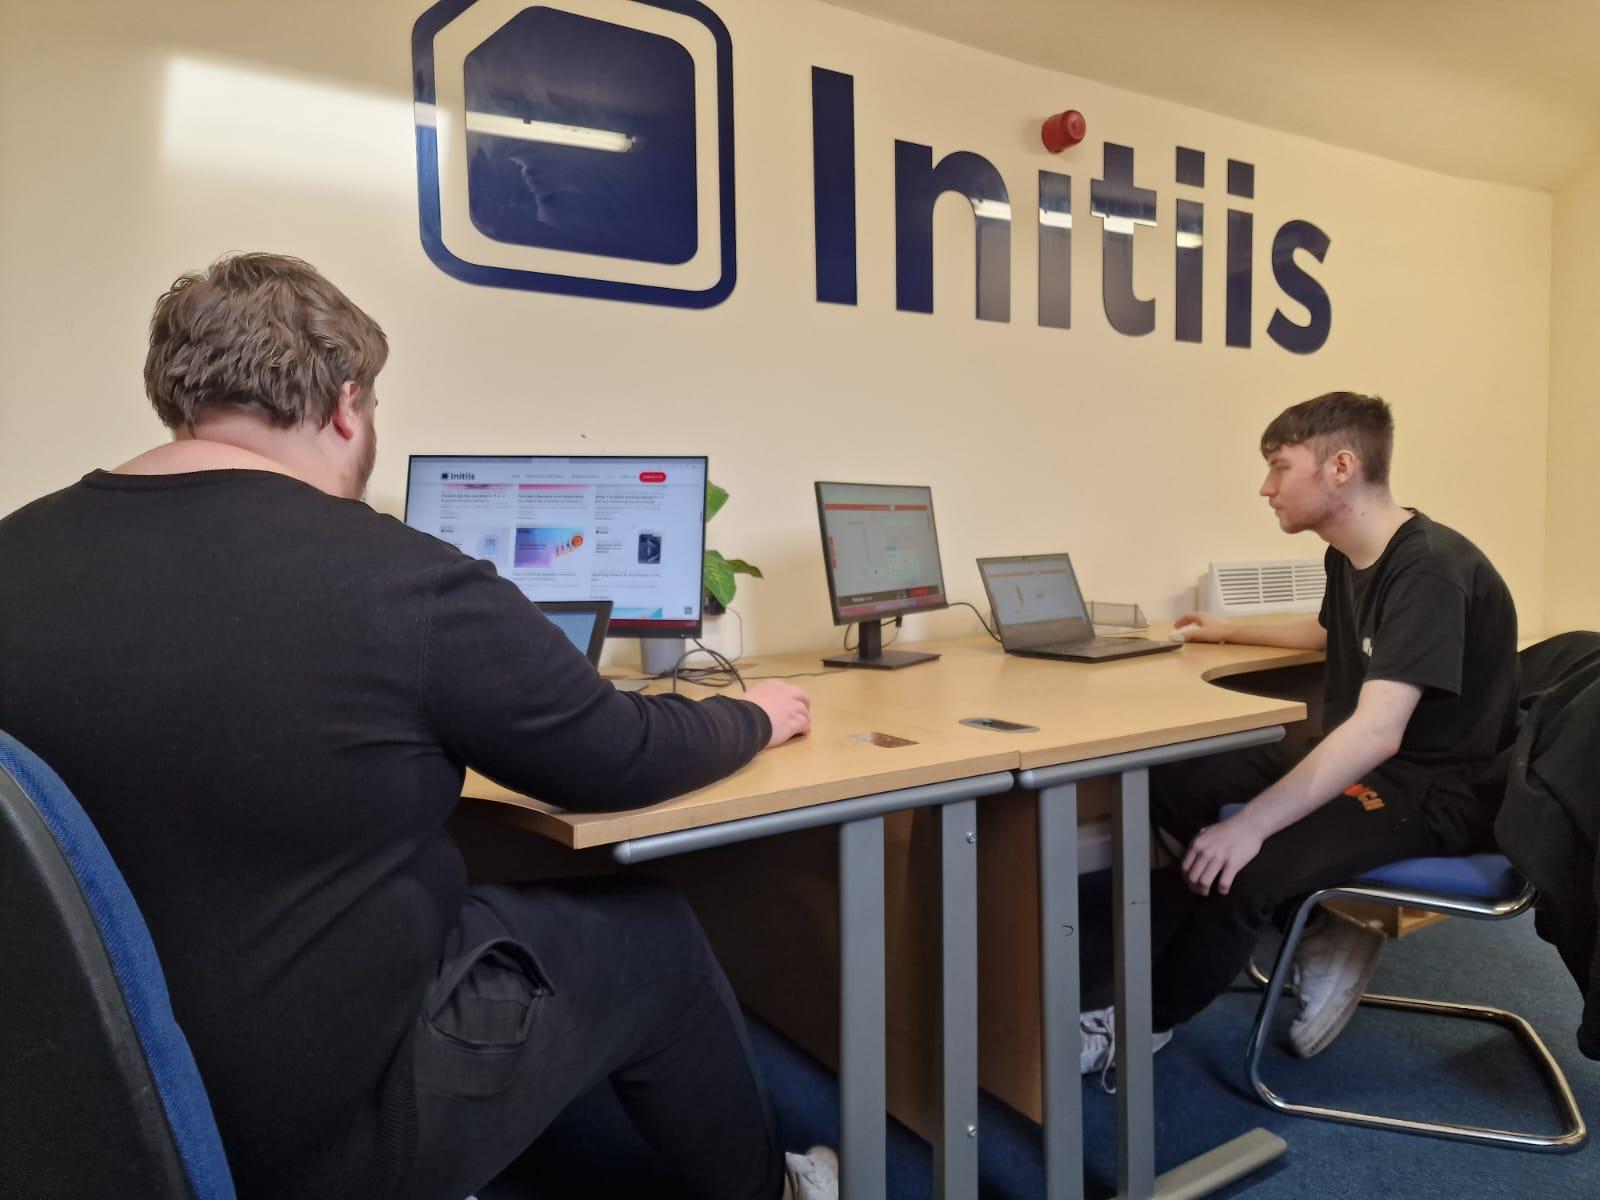 Images Initiis Ltd - Business Mobile Deals & Phone Contracts